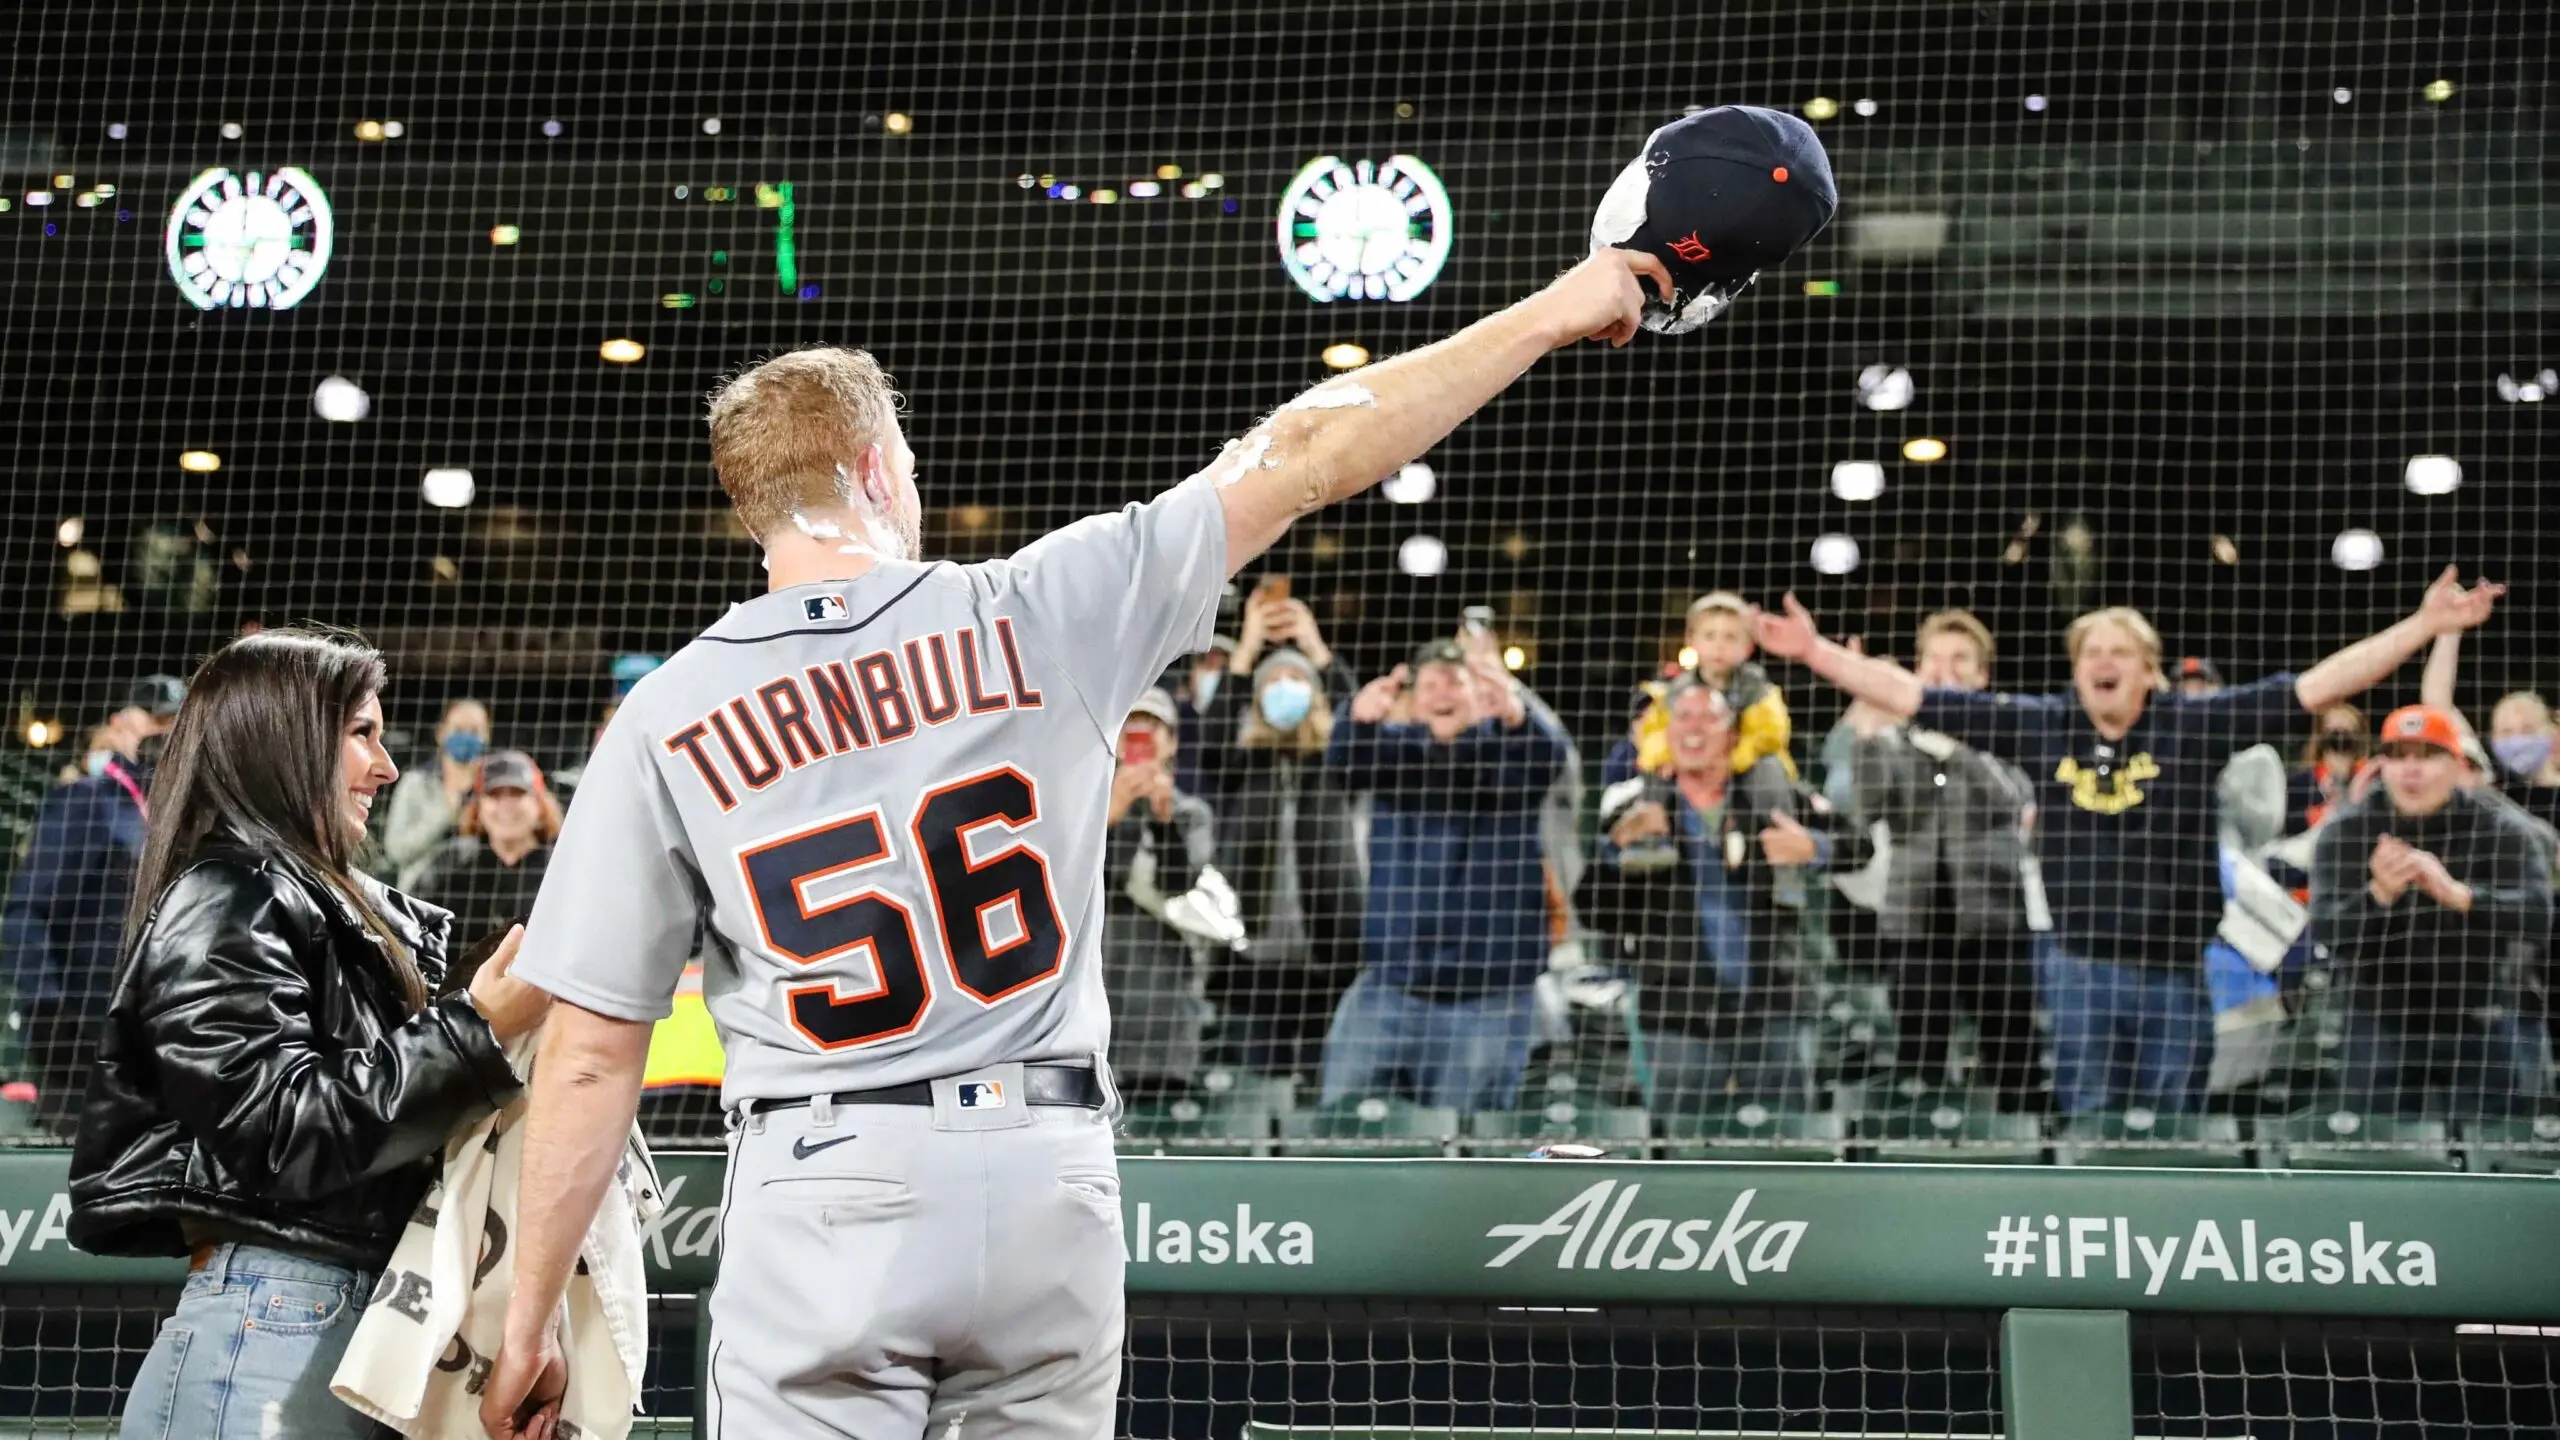 Spencer Turnbull consegue no-hitter e Tigers vencem Mariners